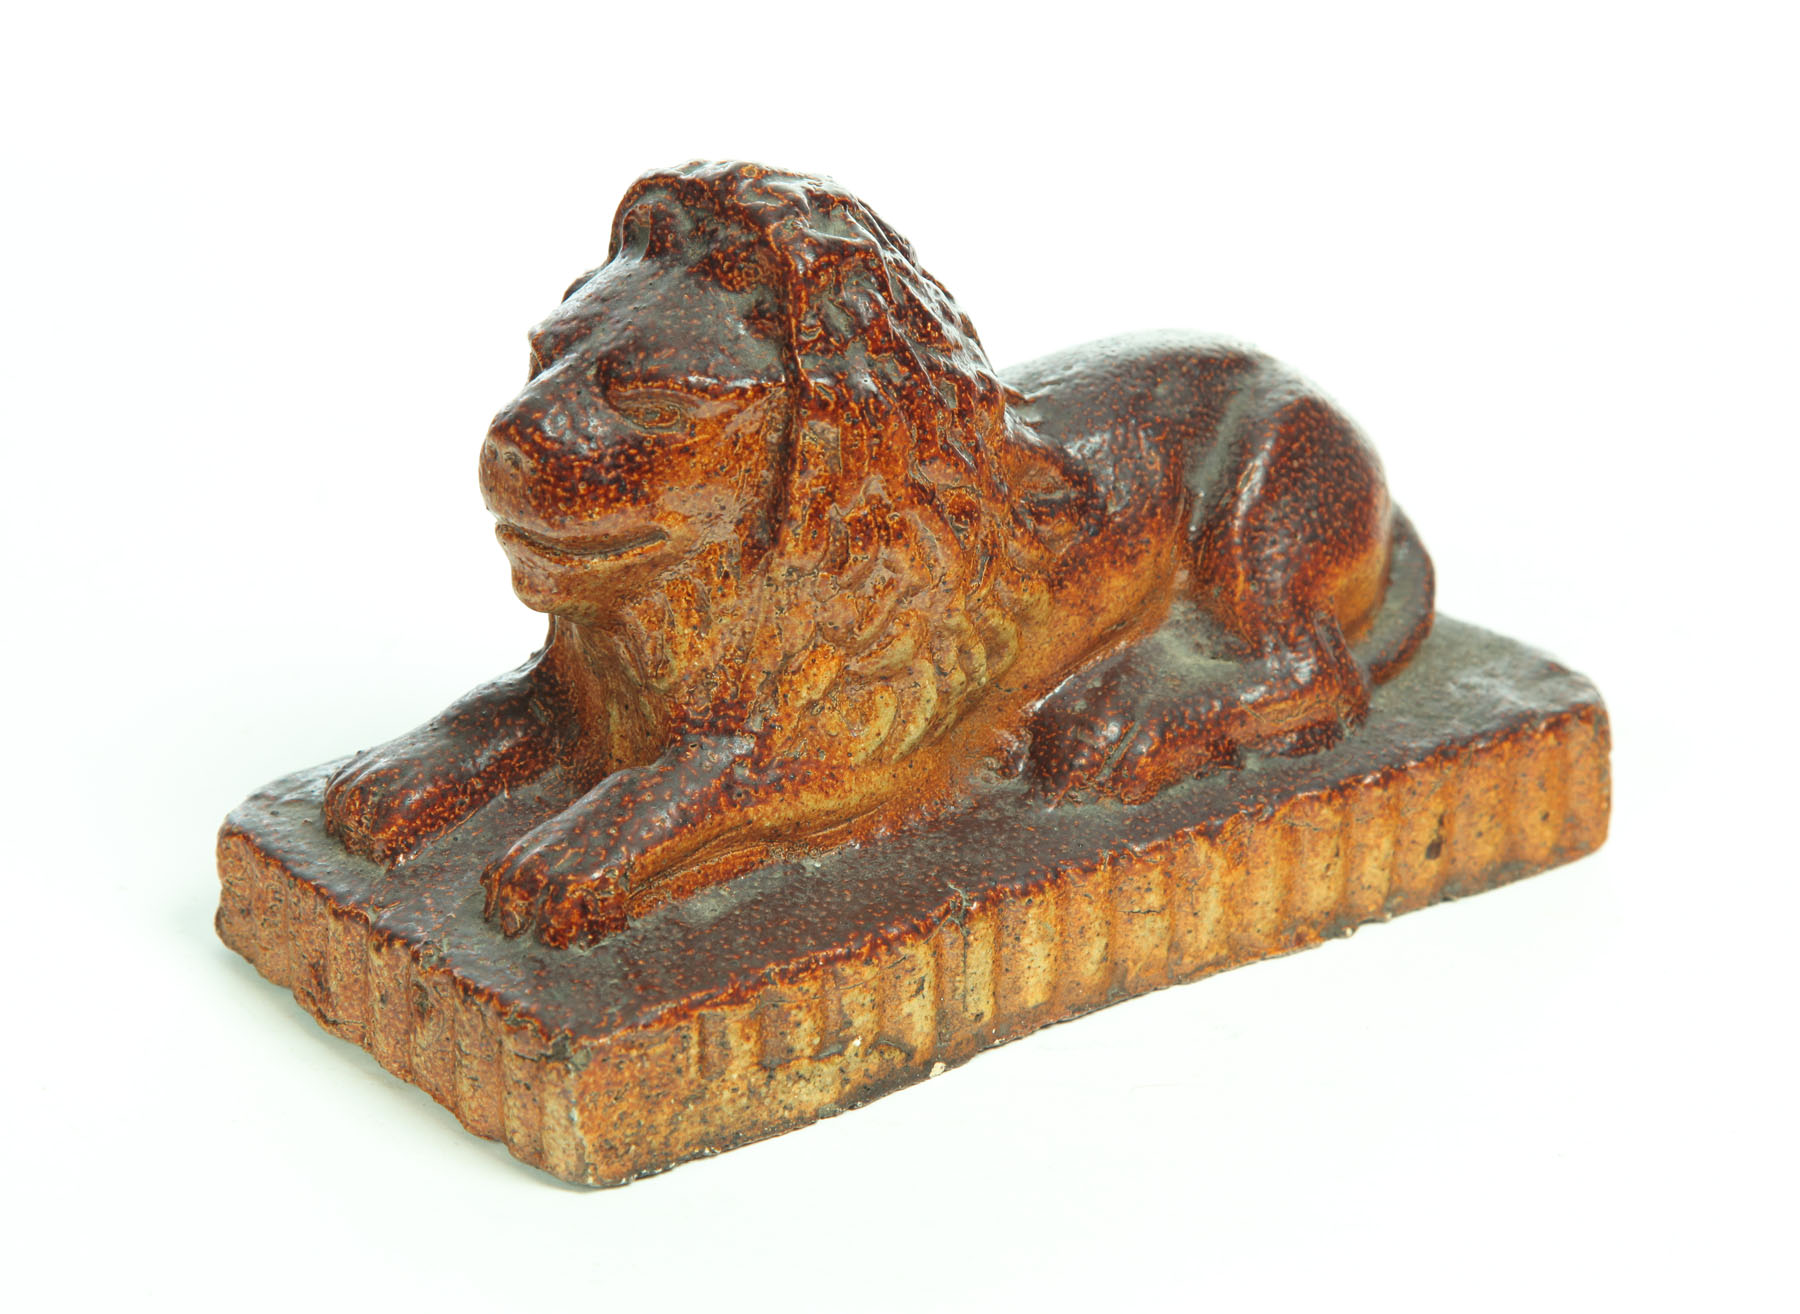 SEWERTILE LION.  Ohio  early 20th